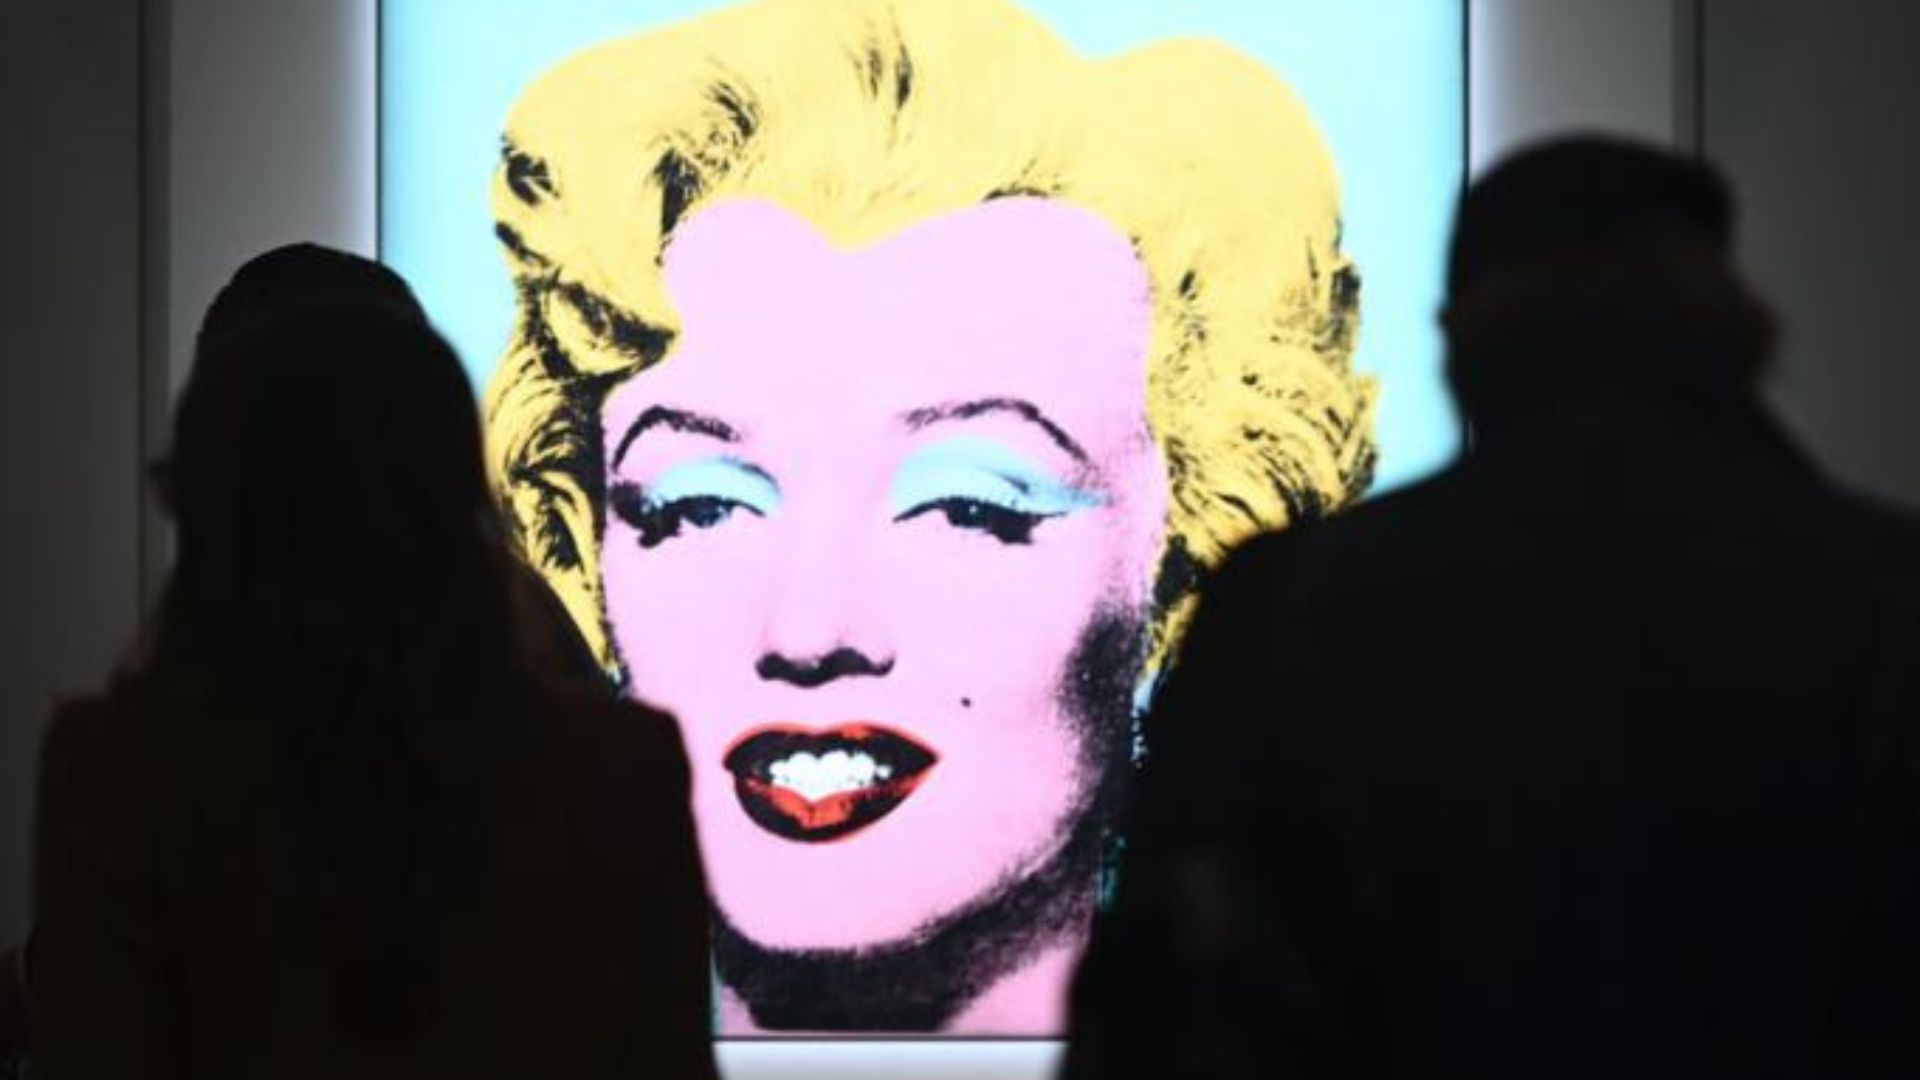 Andy Warhols Marilyn Monroe picture sells for a record 195M usd